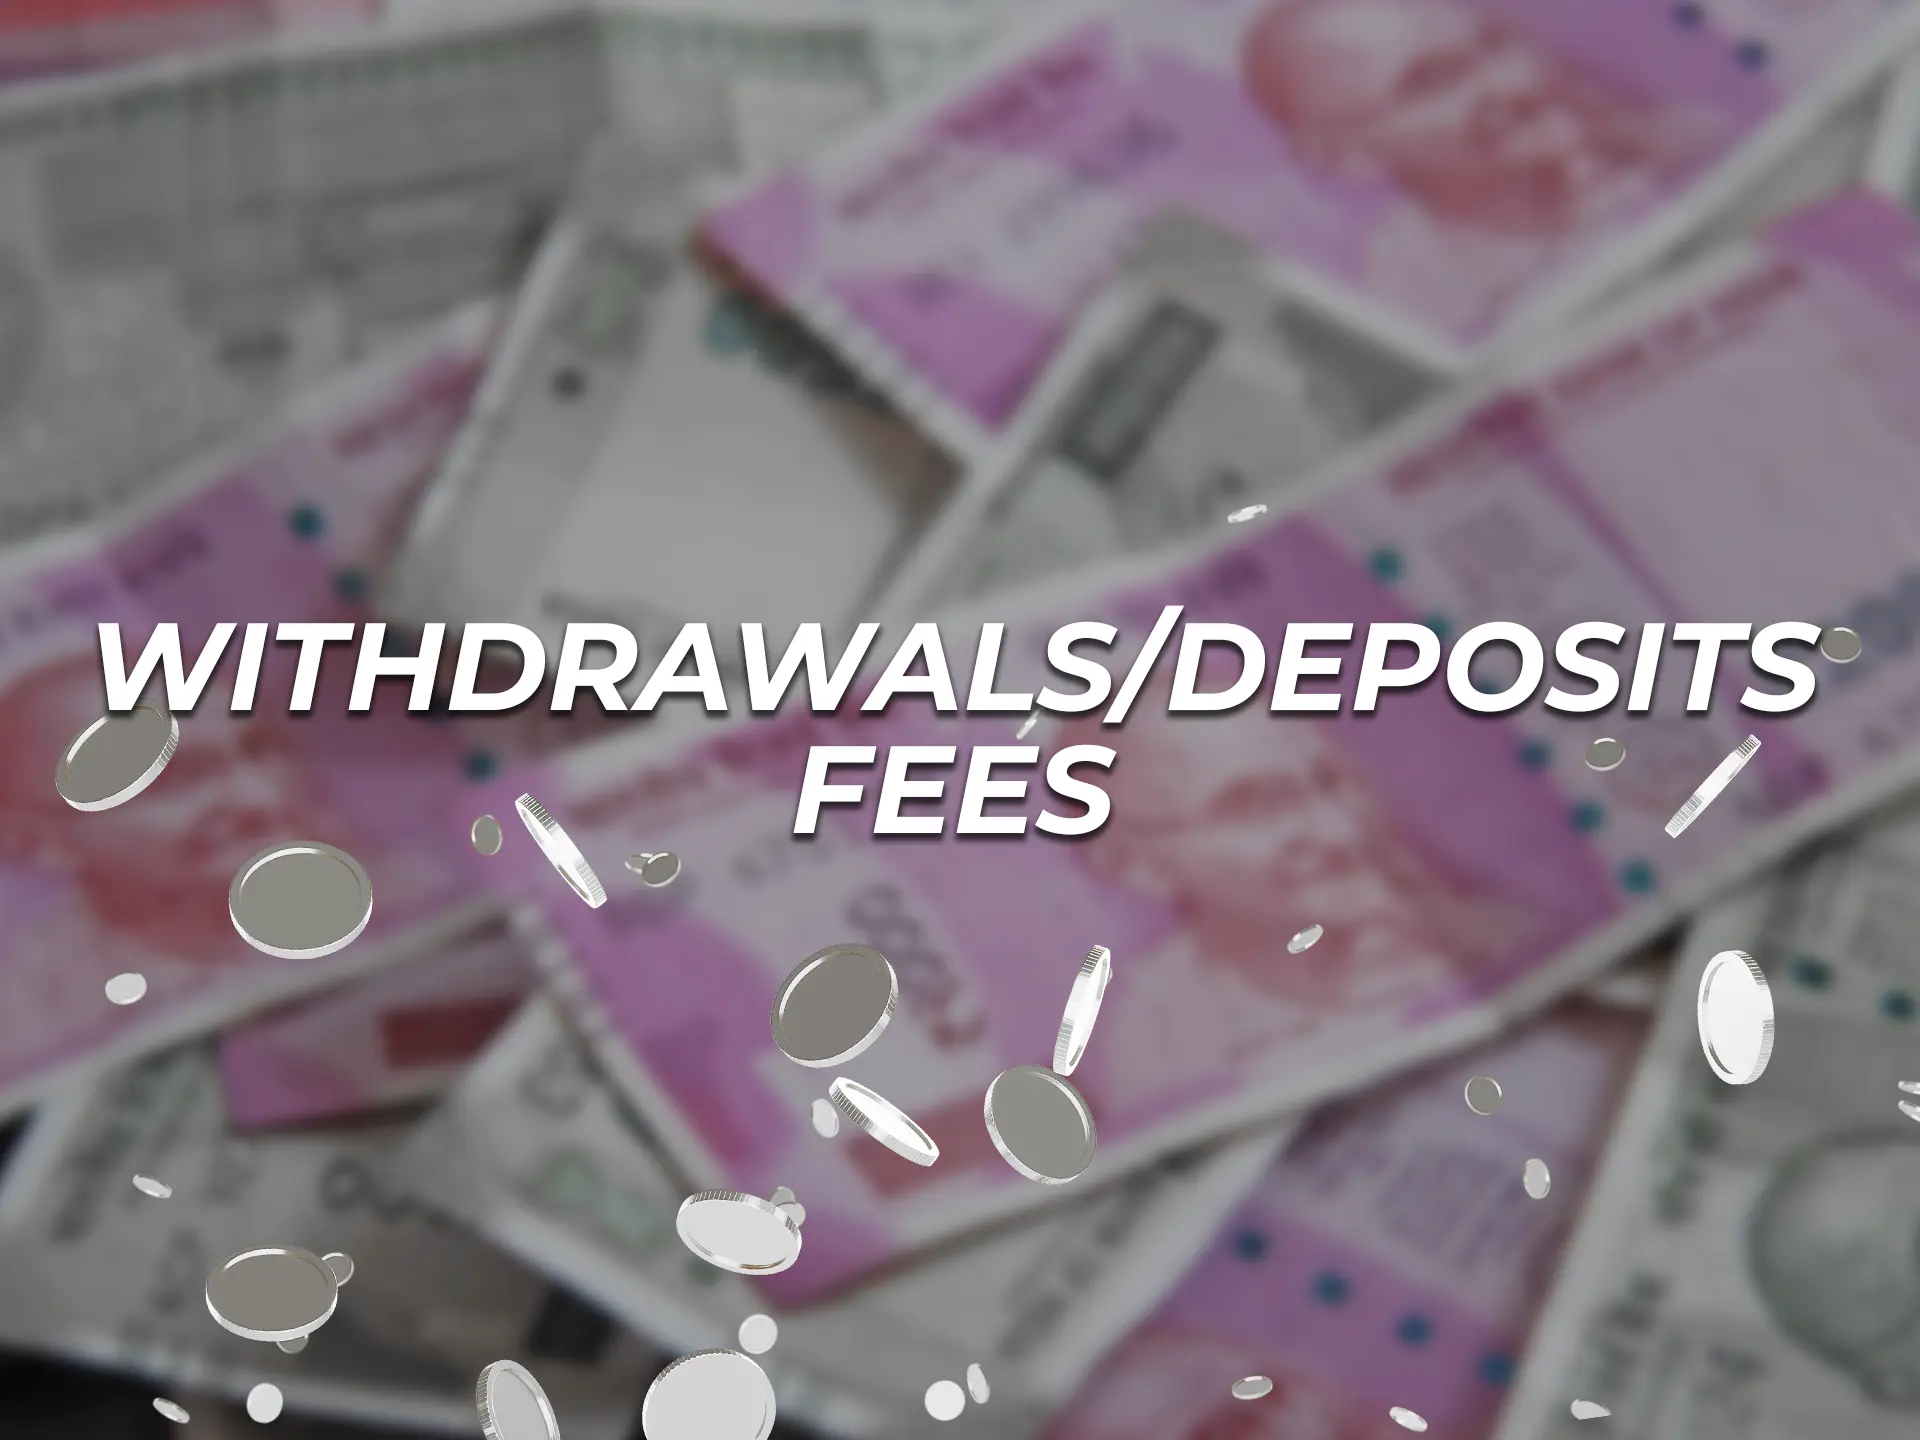 Remember that some betting sites may charge a commission for depositing or withdrawing funds.